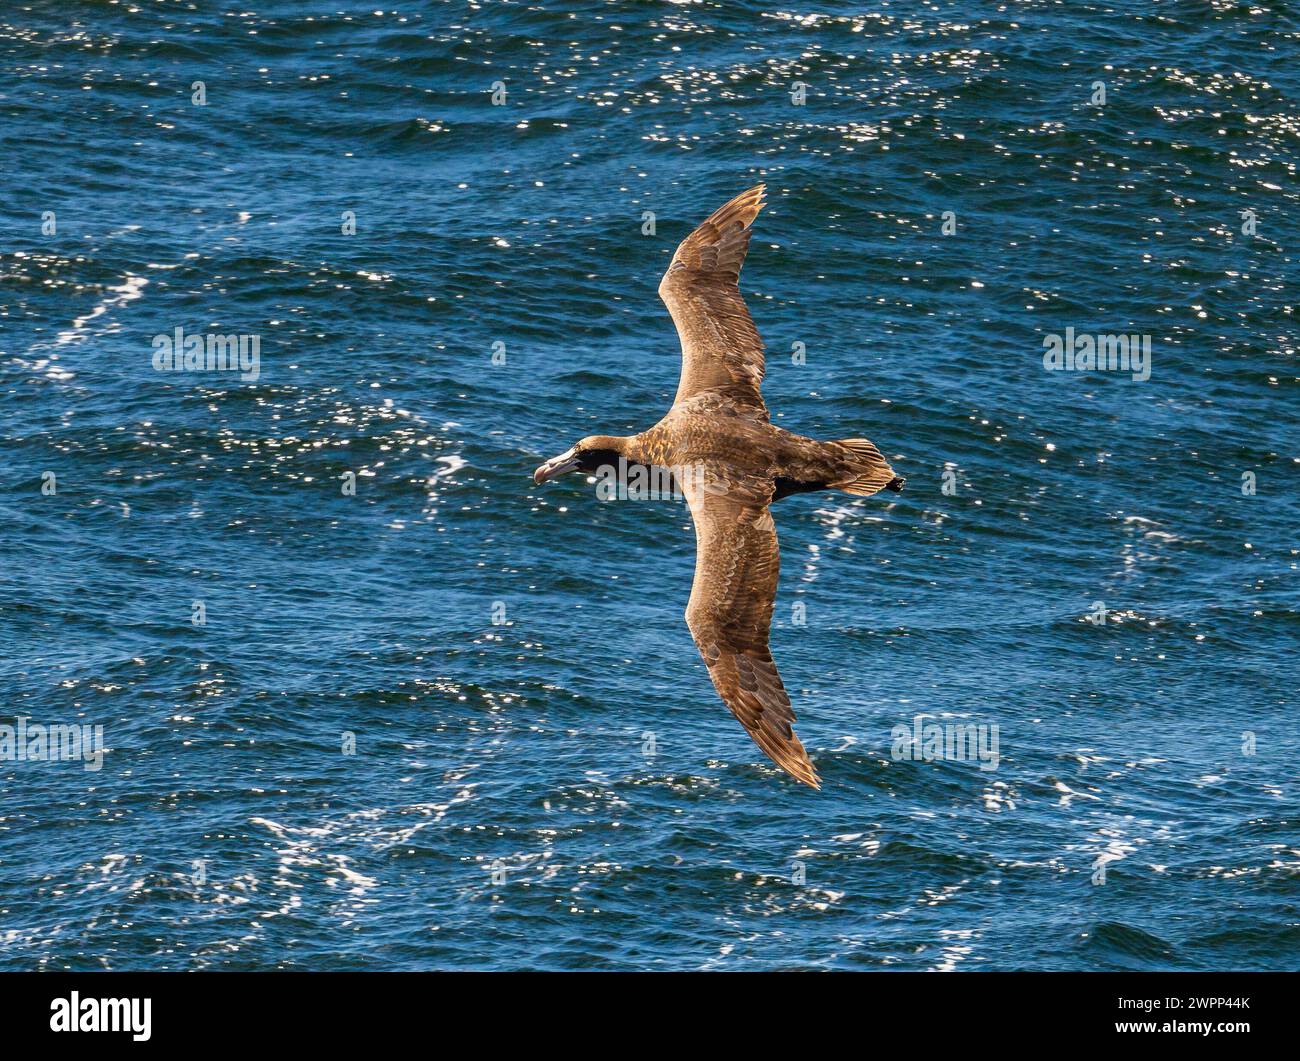 A Northern Giant-Petrel (Macronectes halli) flying over ocean. Pacific Ocean, off the coast of Chile. Stock Photo